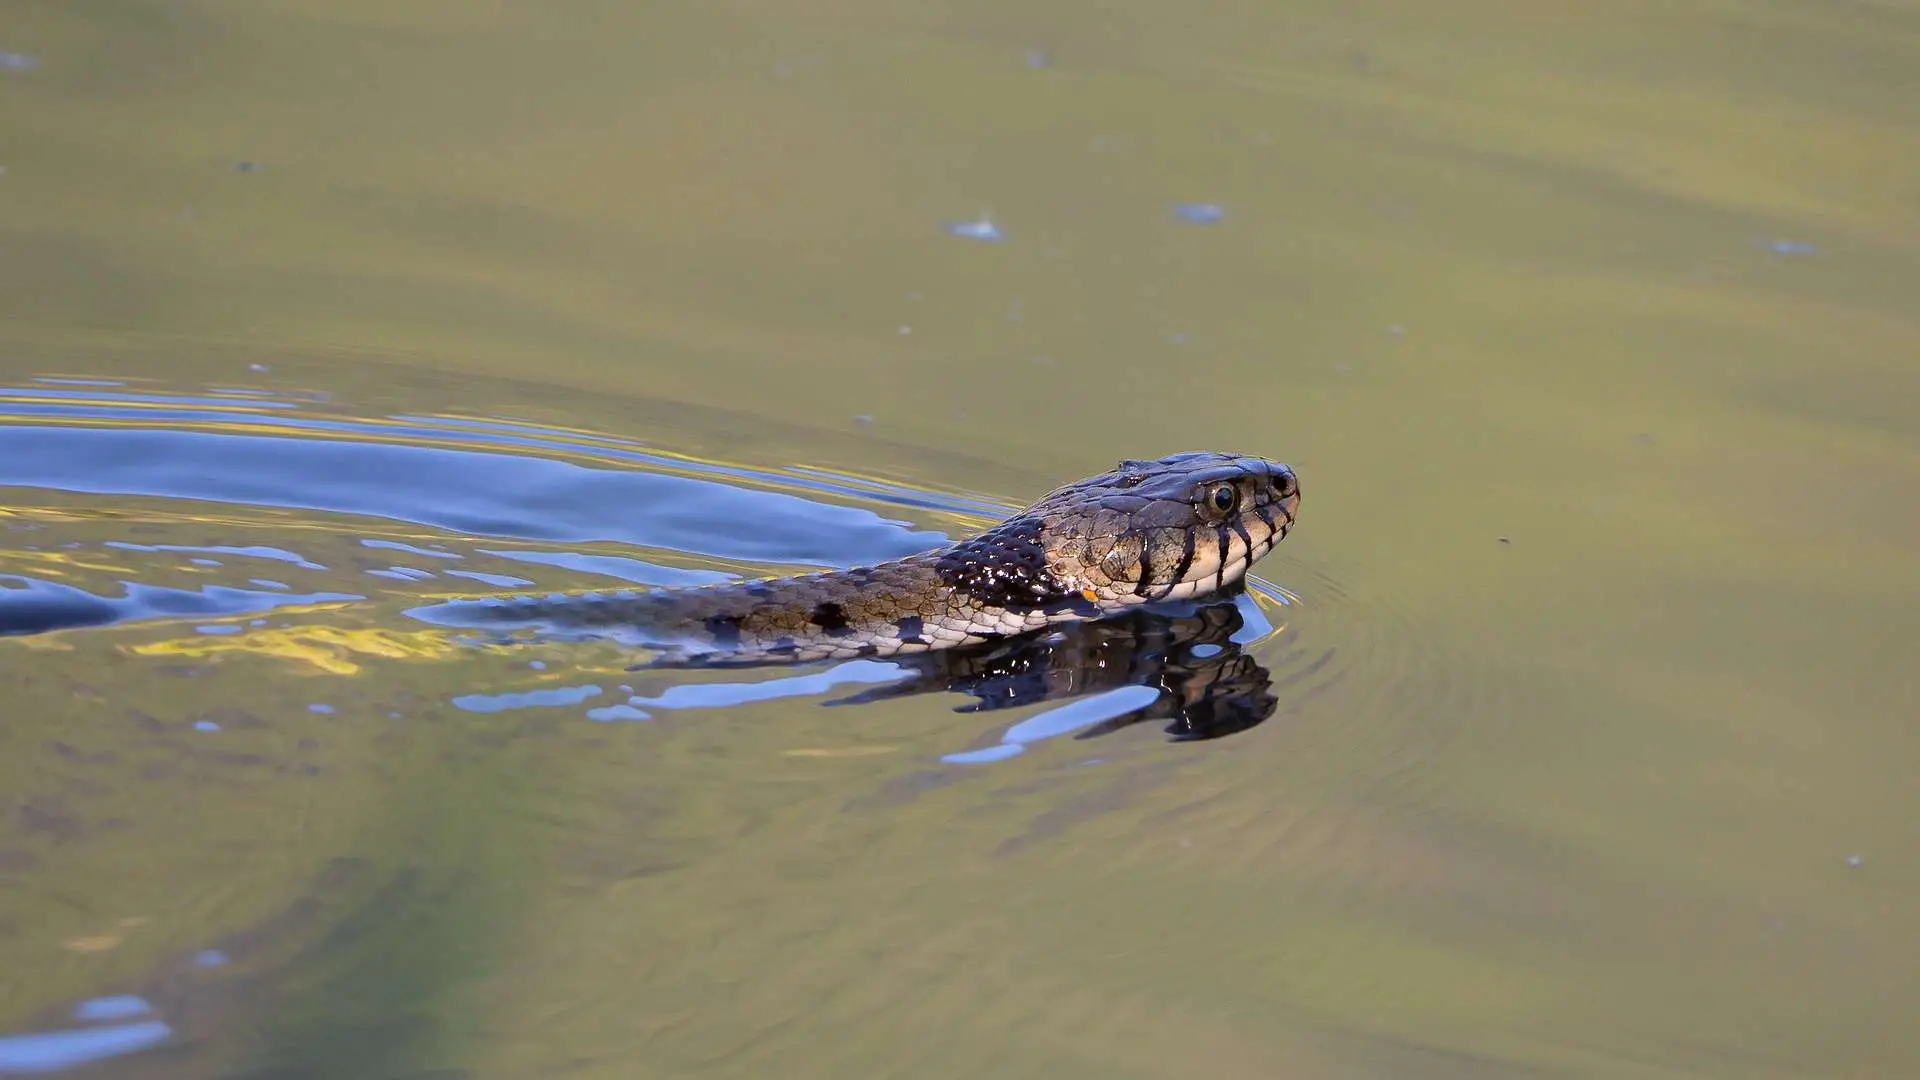 A snake swimming across the surface of the water